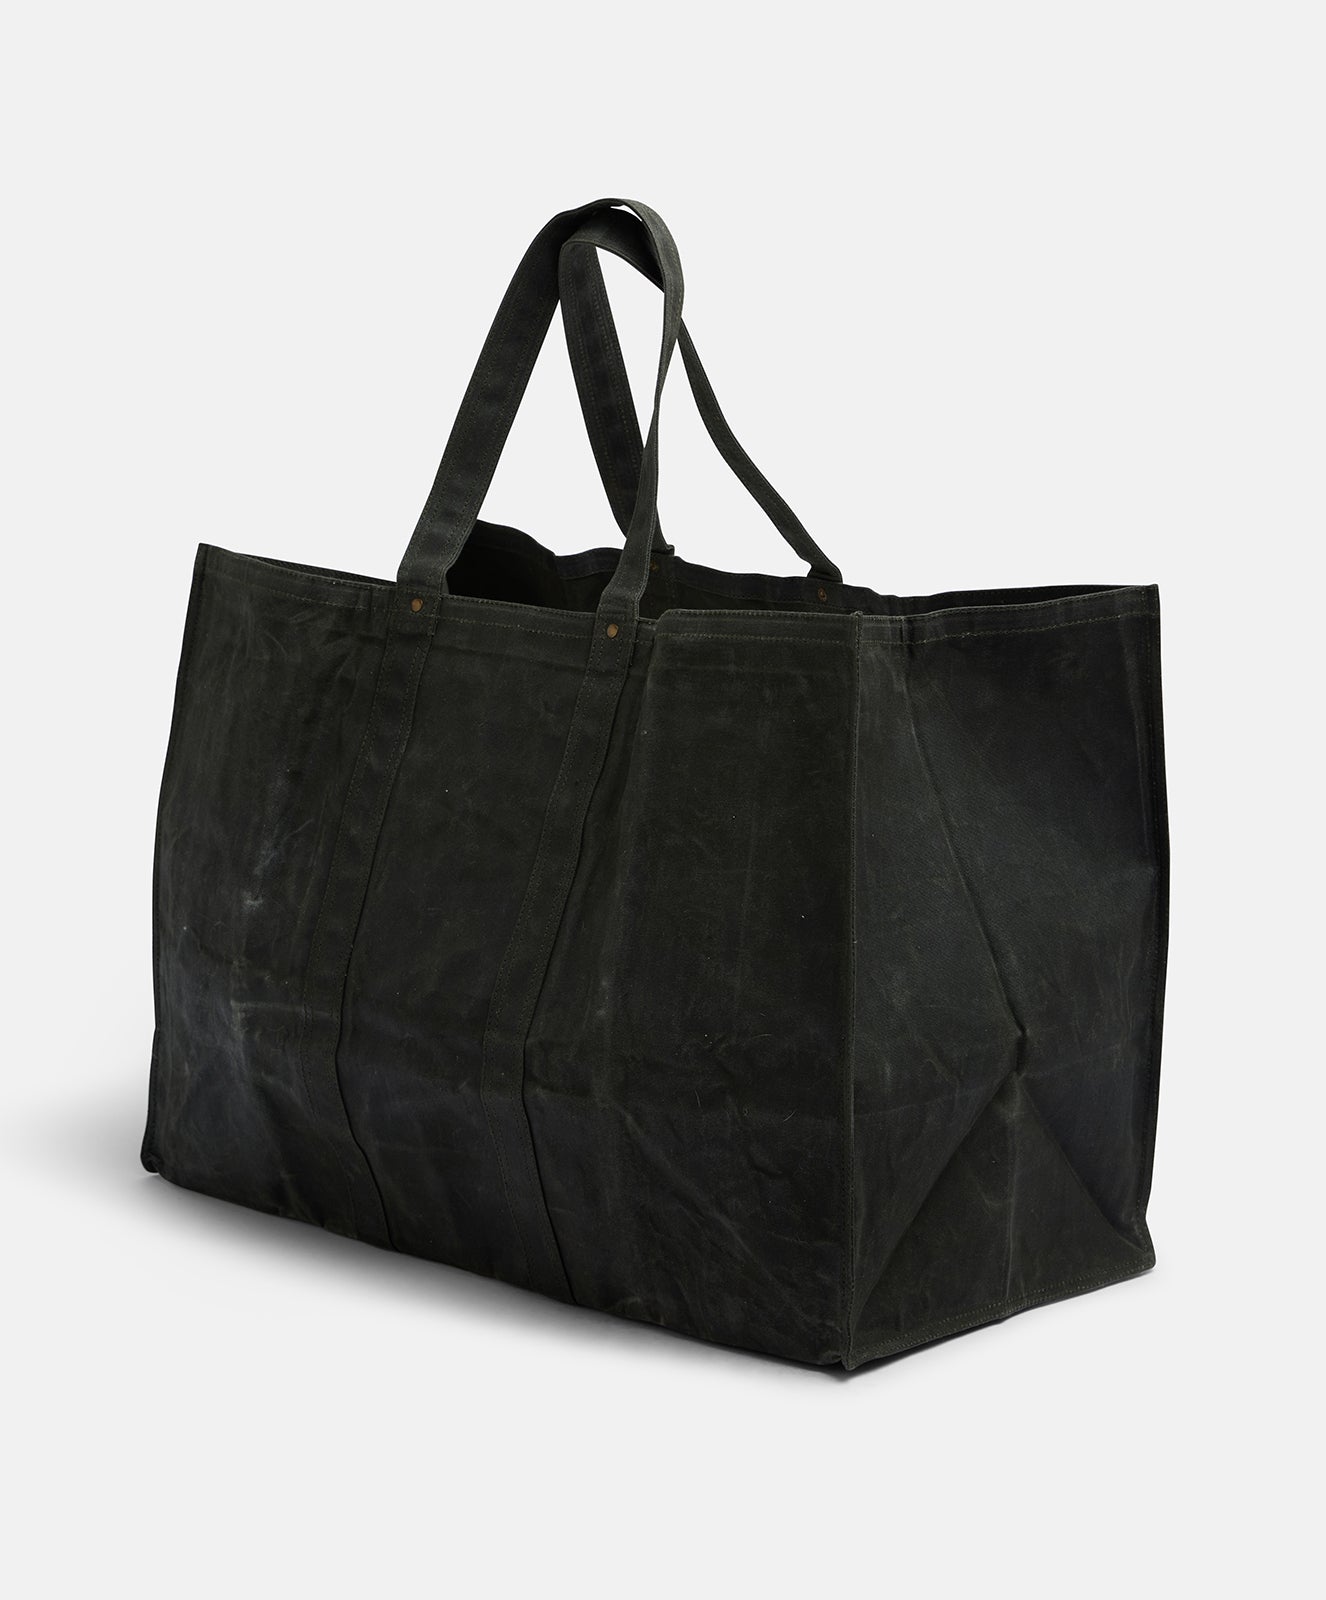 Market Carry All Canvas Tote Bag | Duffle Green